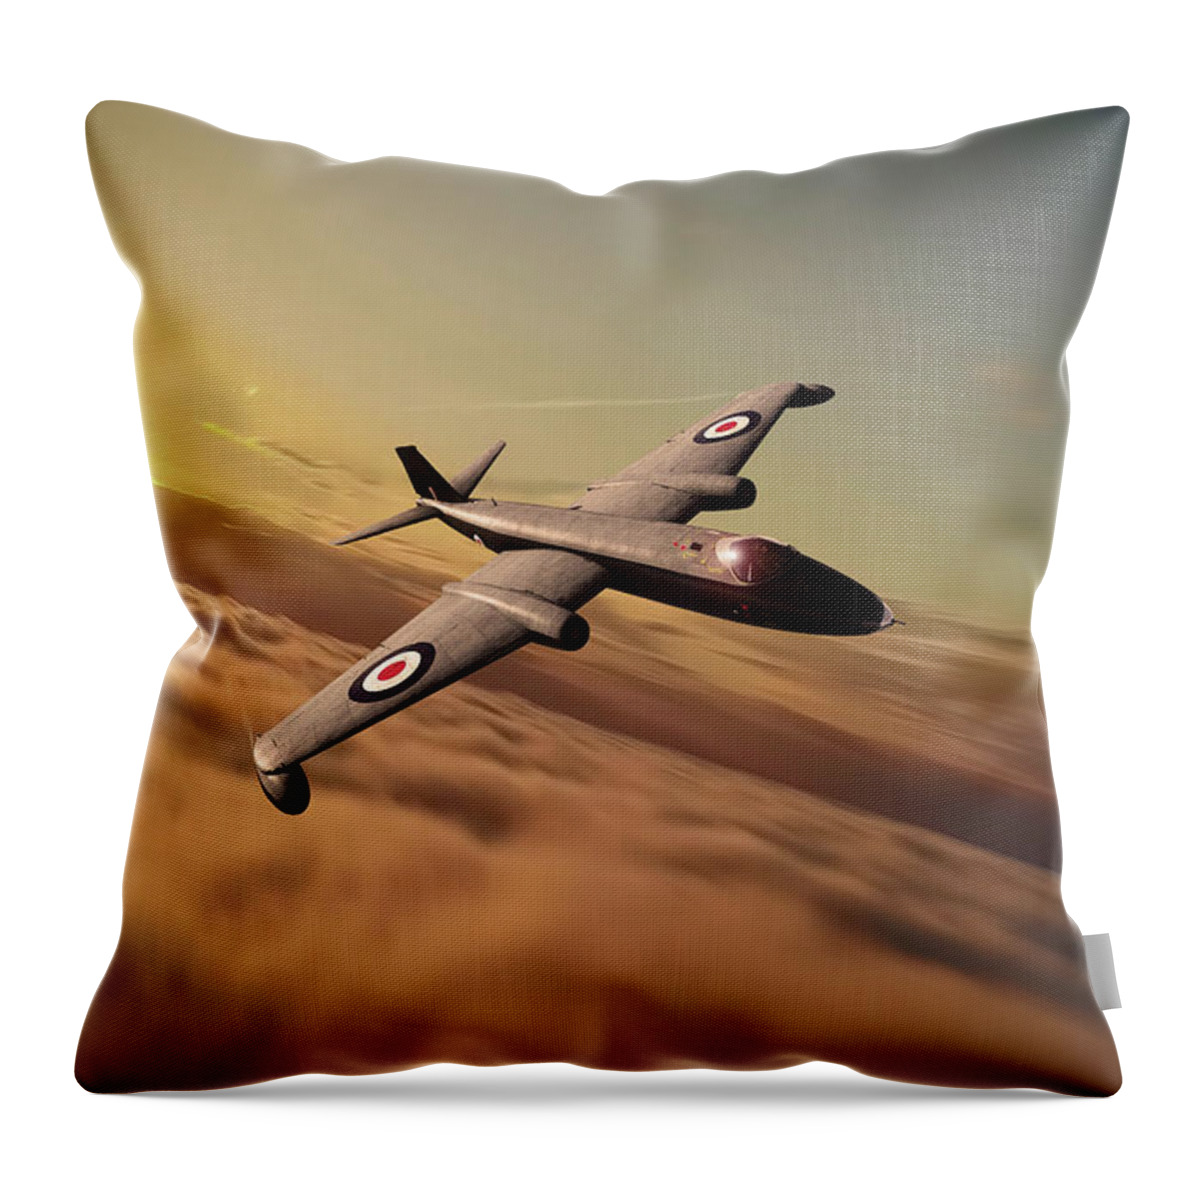 English Electric Canberra Throw Pillow featuring the digital art Canberra by Airpower Art